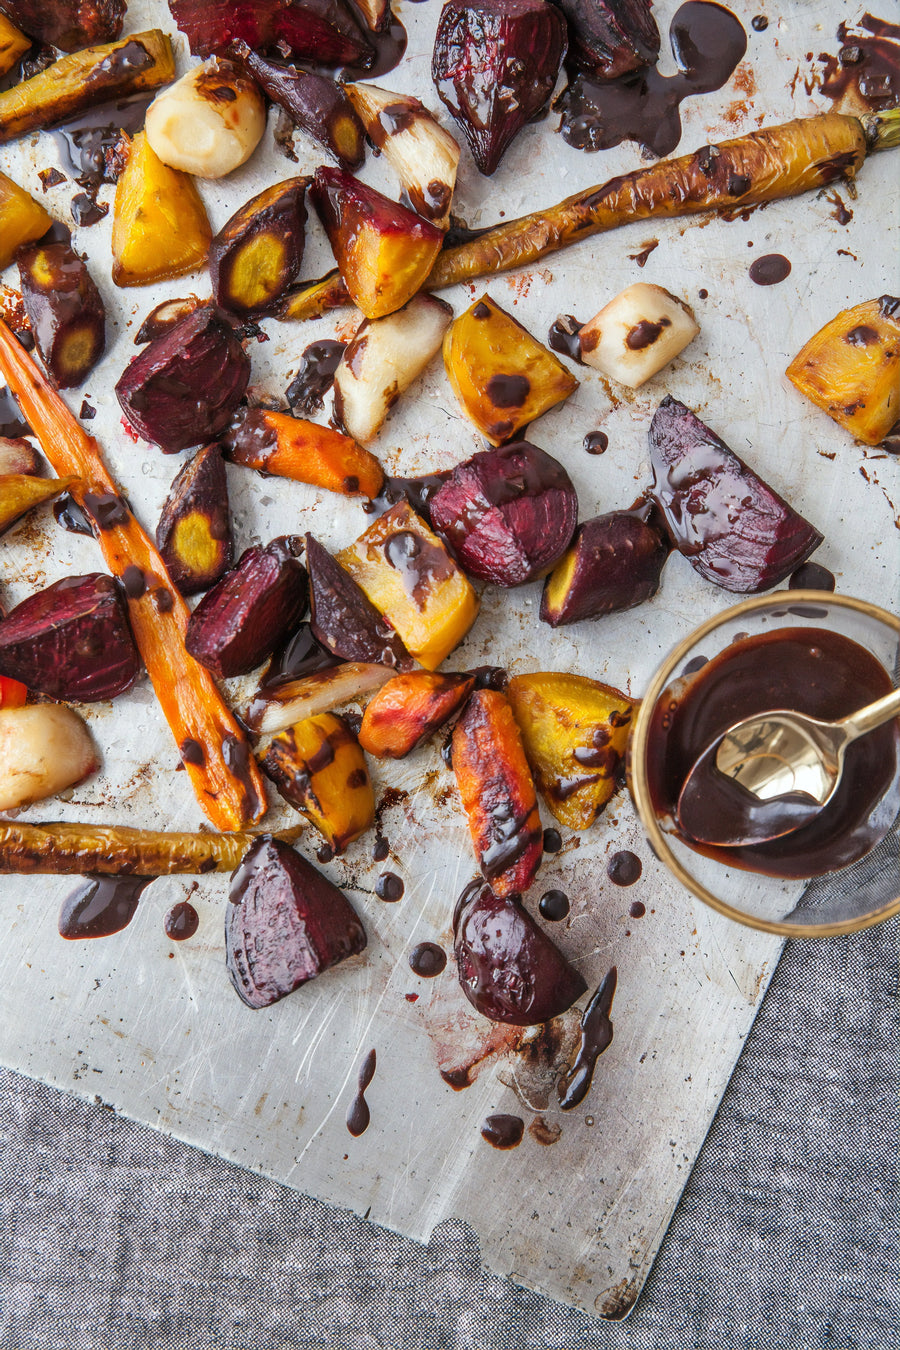 Roasted Red Beets with Balsamic Glaze